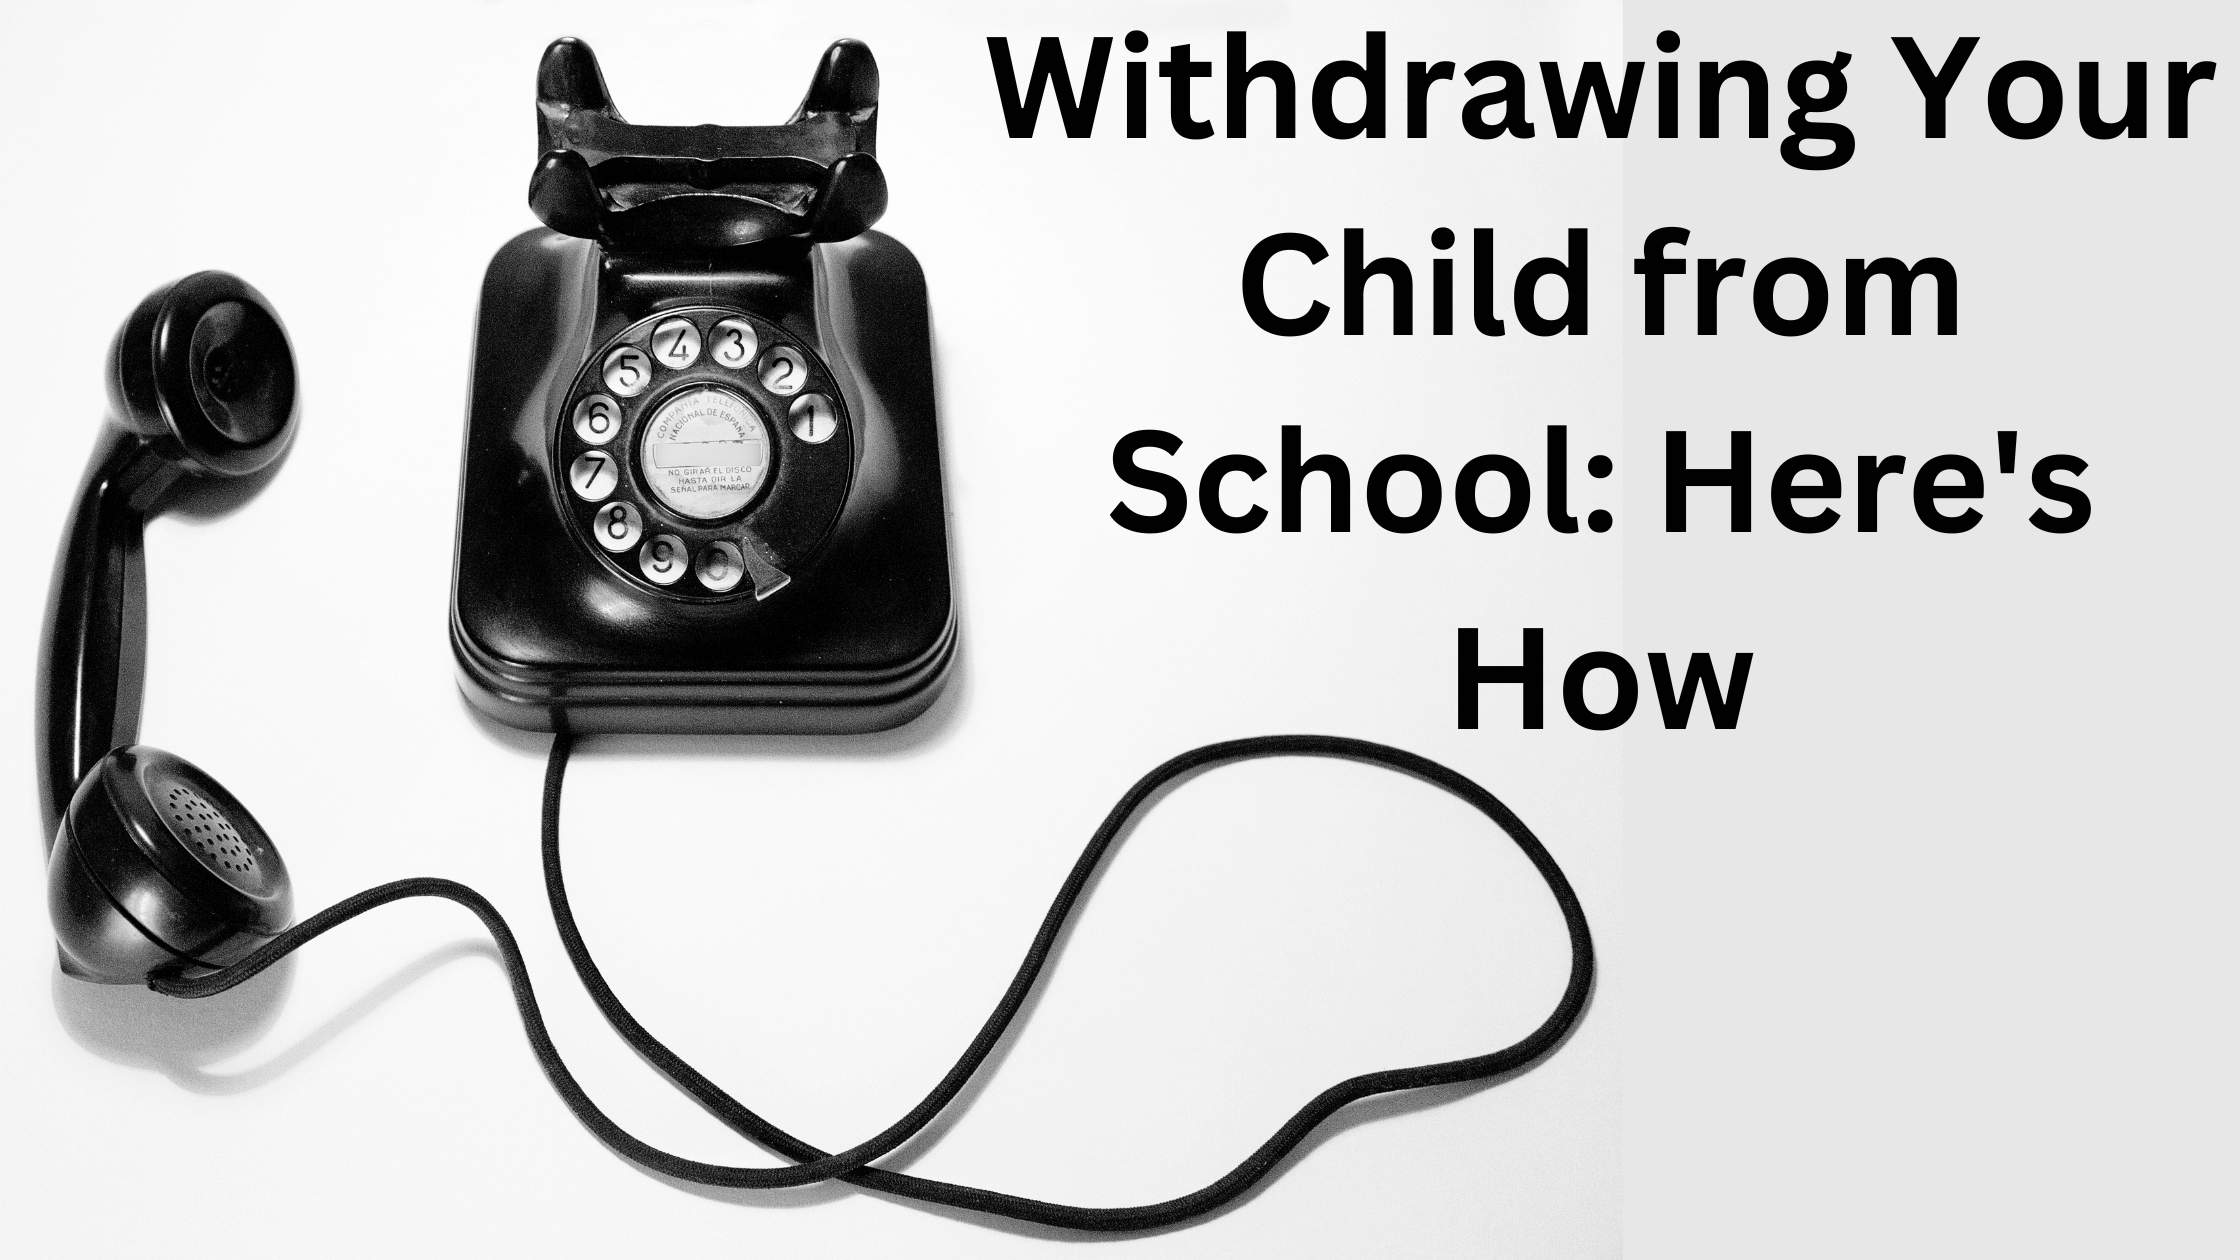 can i withdraw my child from school over the phone